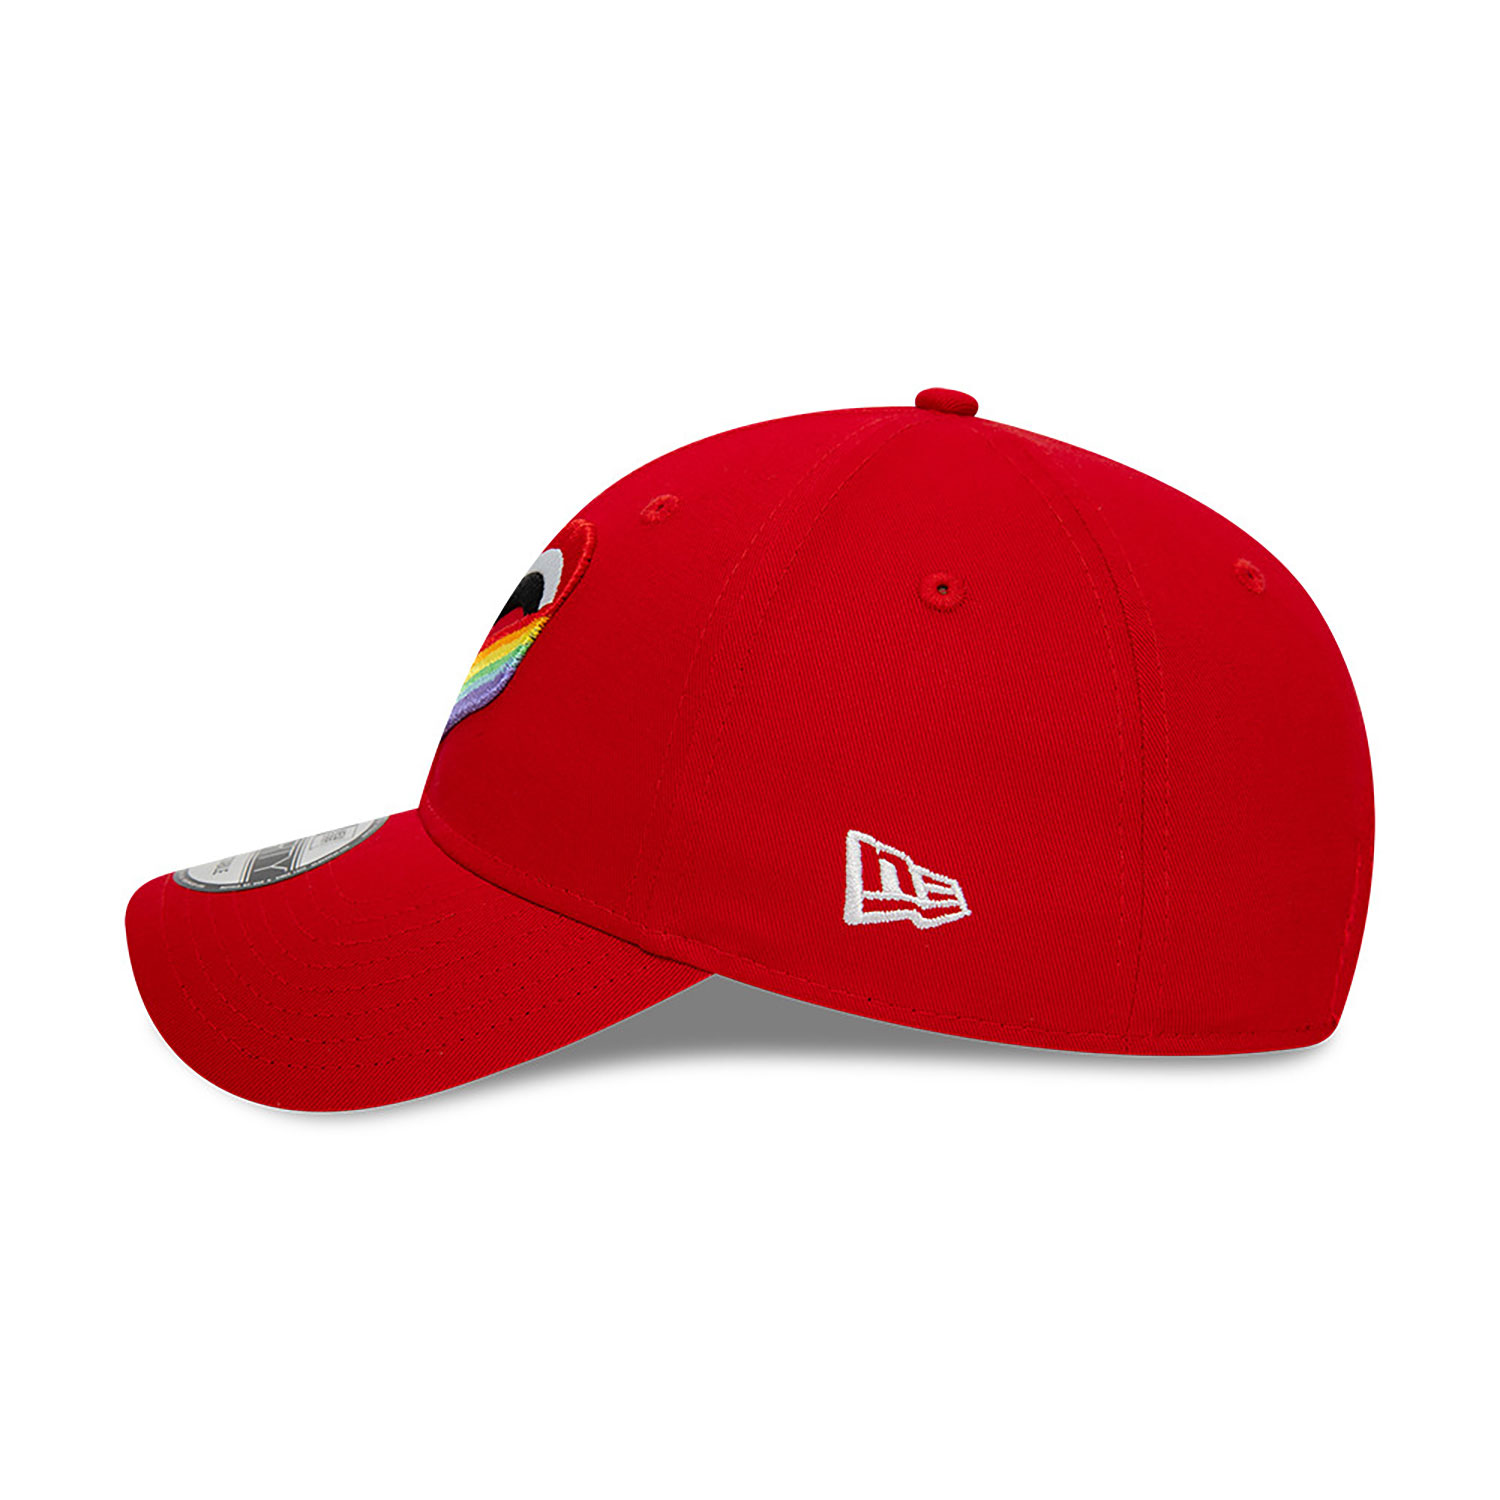 Manchester United One Love Red 9FORTY Adjustable Cap